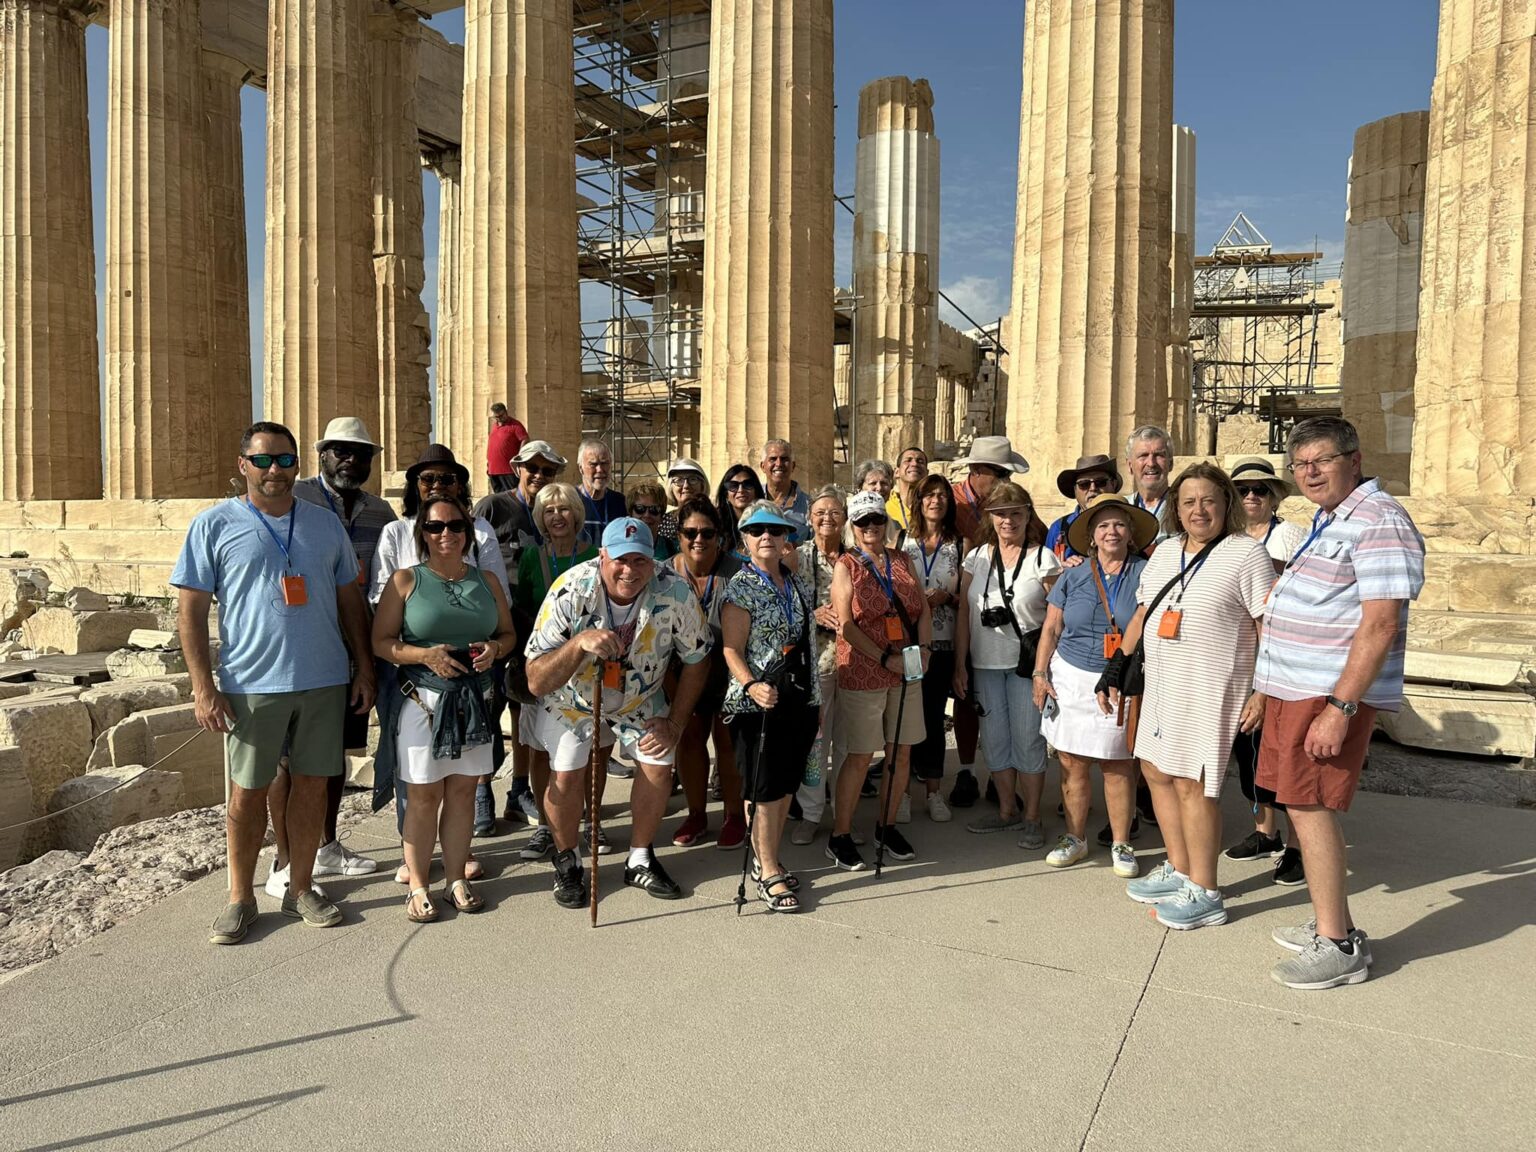 Spectacular Greece with Island Cruise